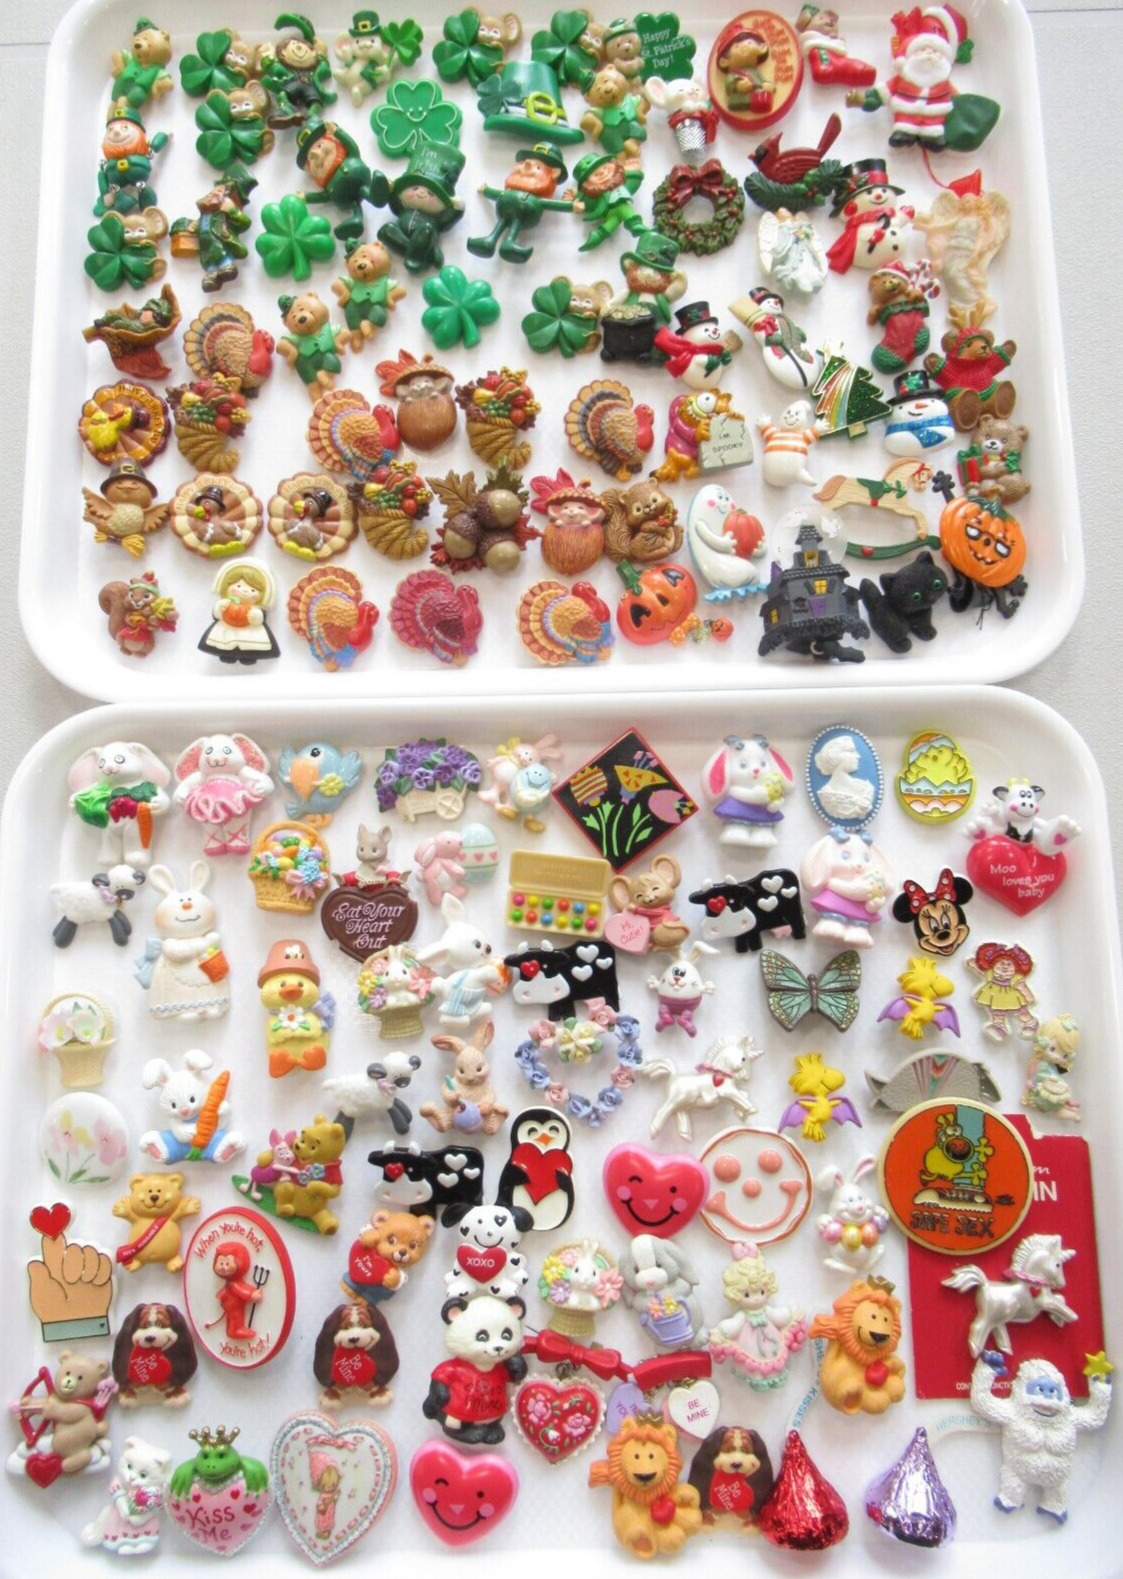 140 Plastic Figurine Brooches, Pins Mostly Hallmark Most are Branded